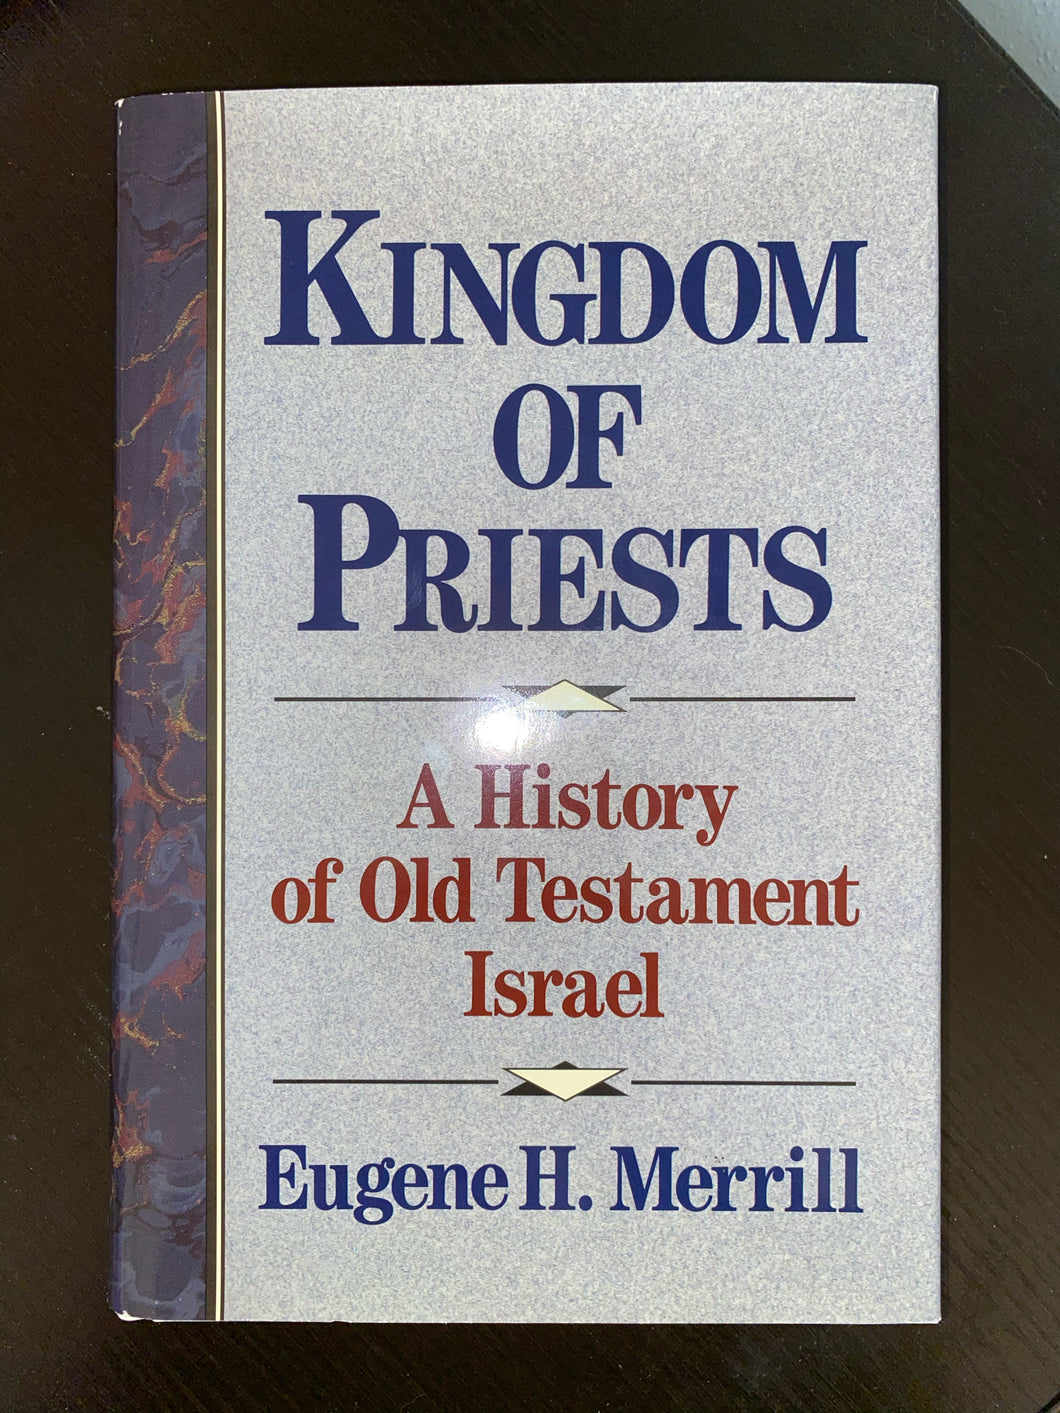 Kingdom of Priests: A History of Old Testament Israel by Eugene H. Merrill